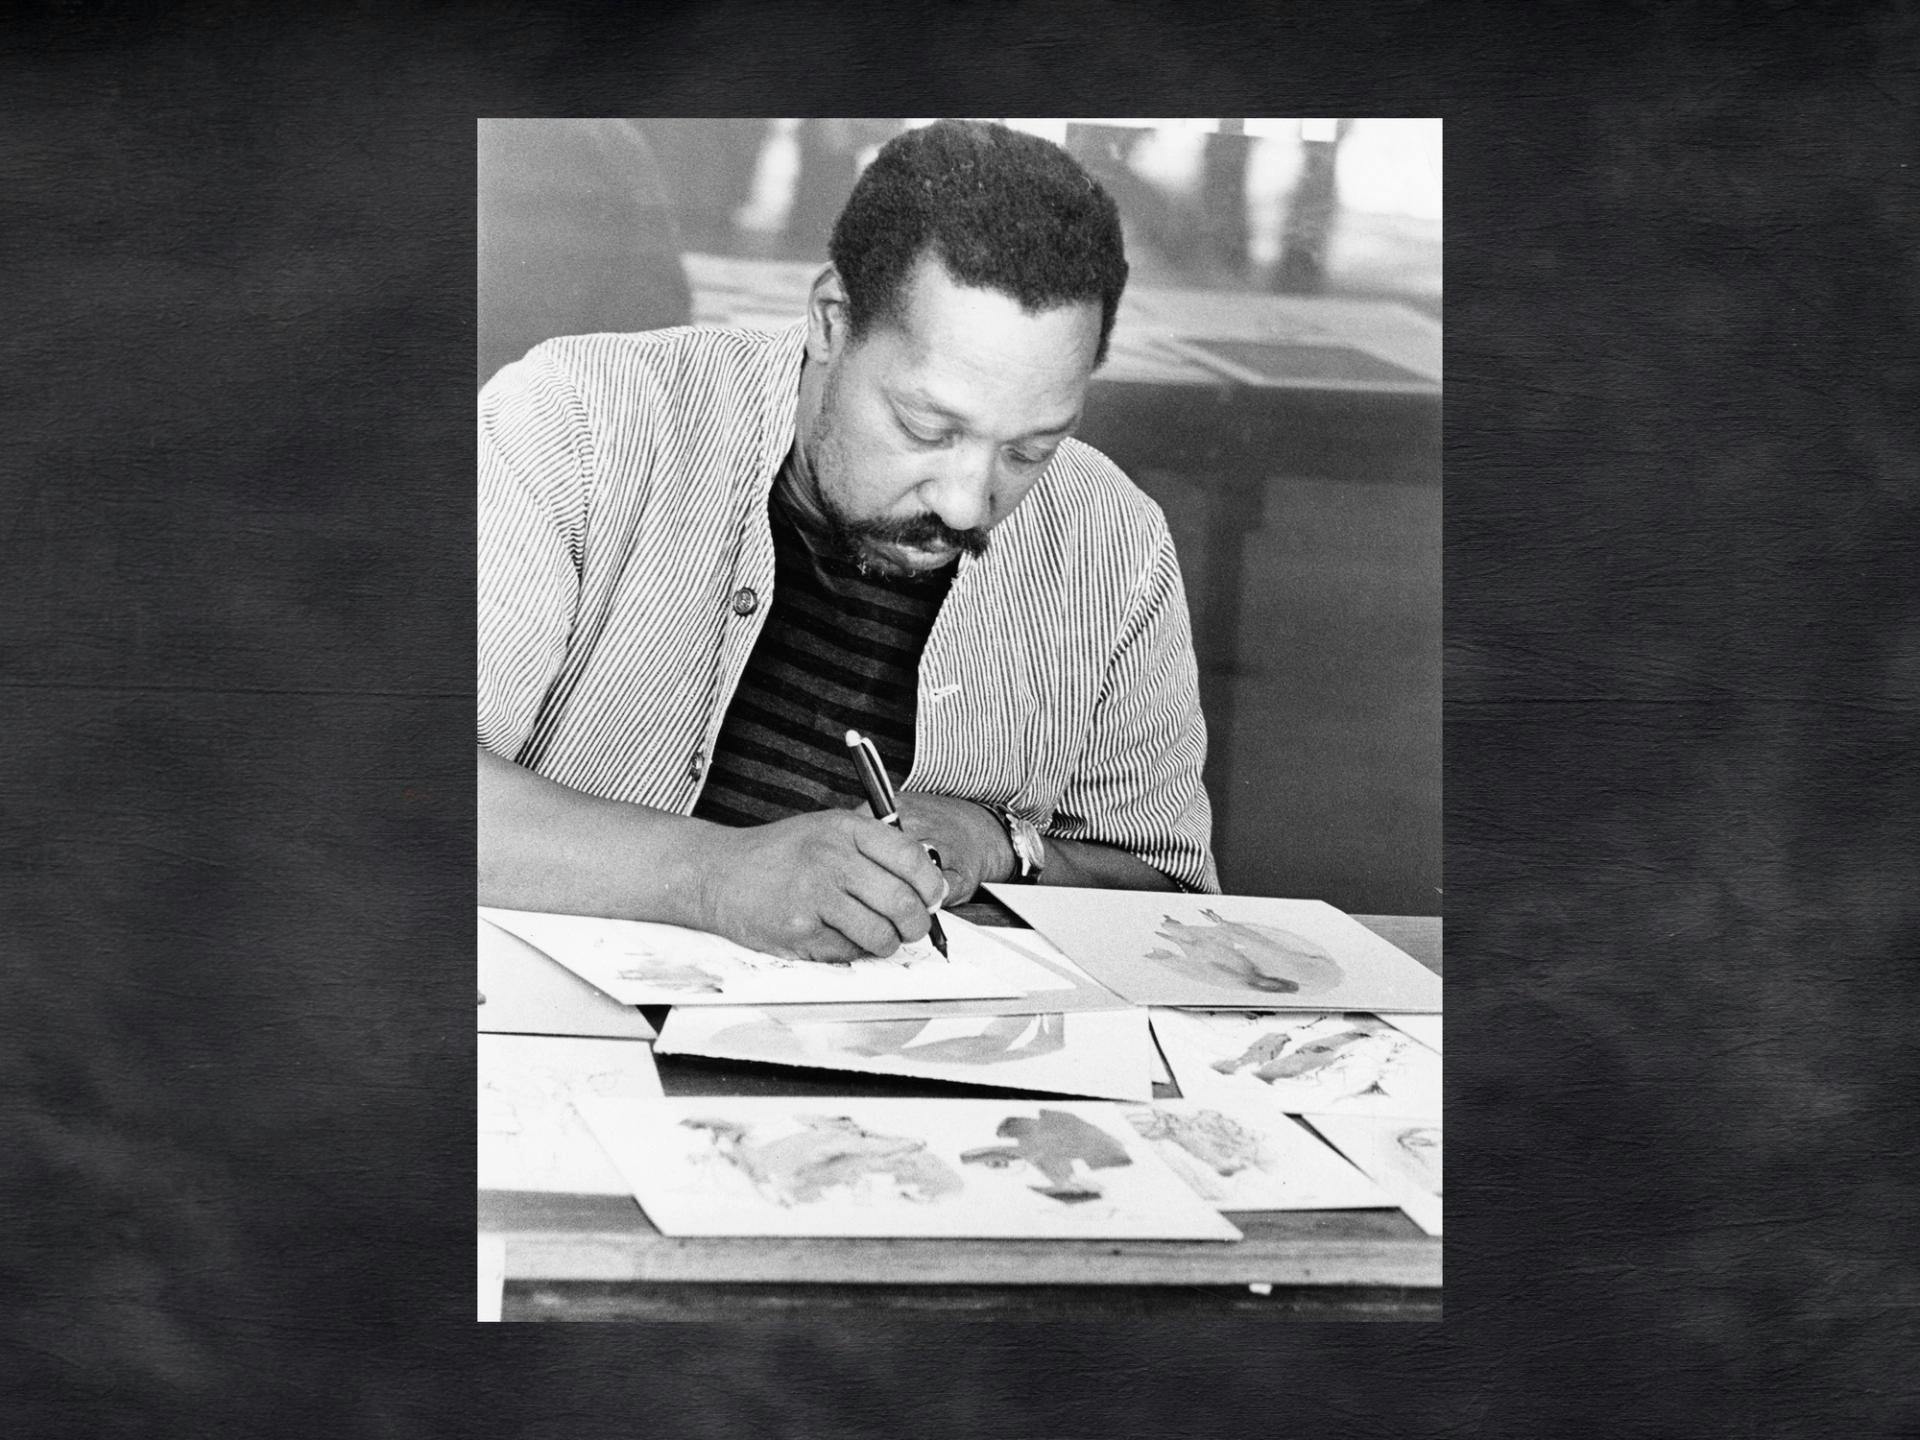 A vintage black and white photo of a man drawing